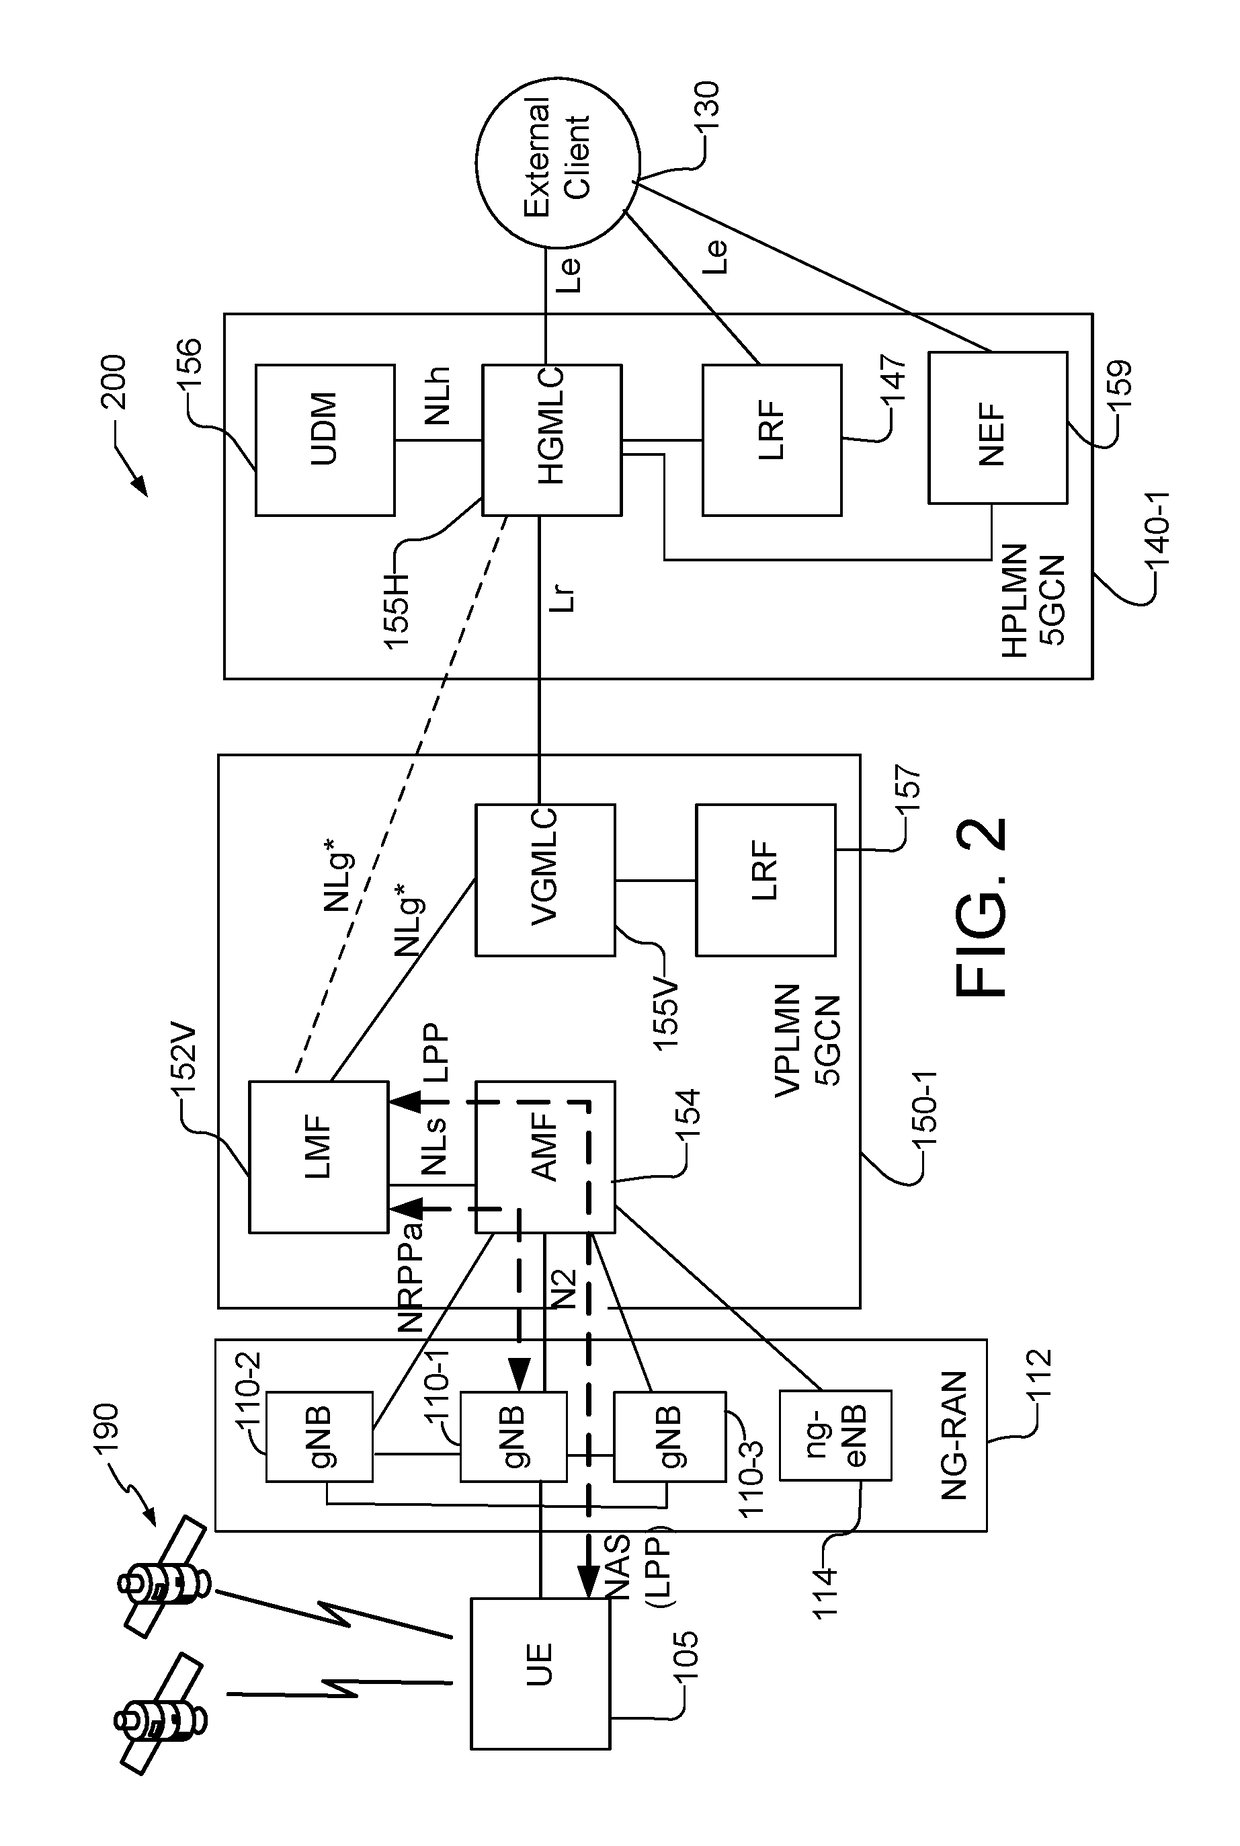 Systems and methods for 5g location support using service based interfaces